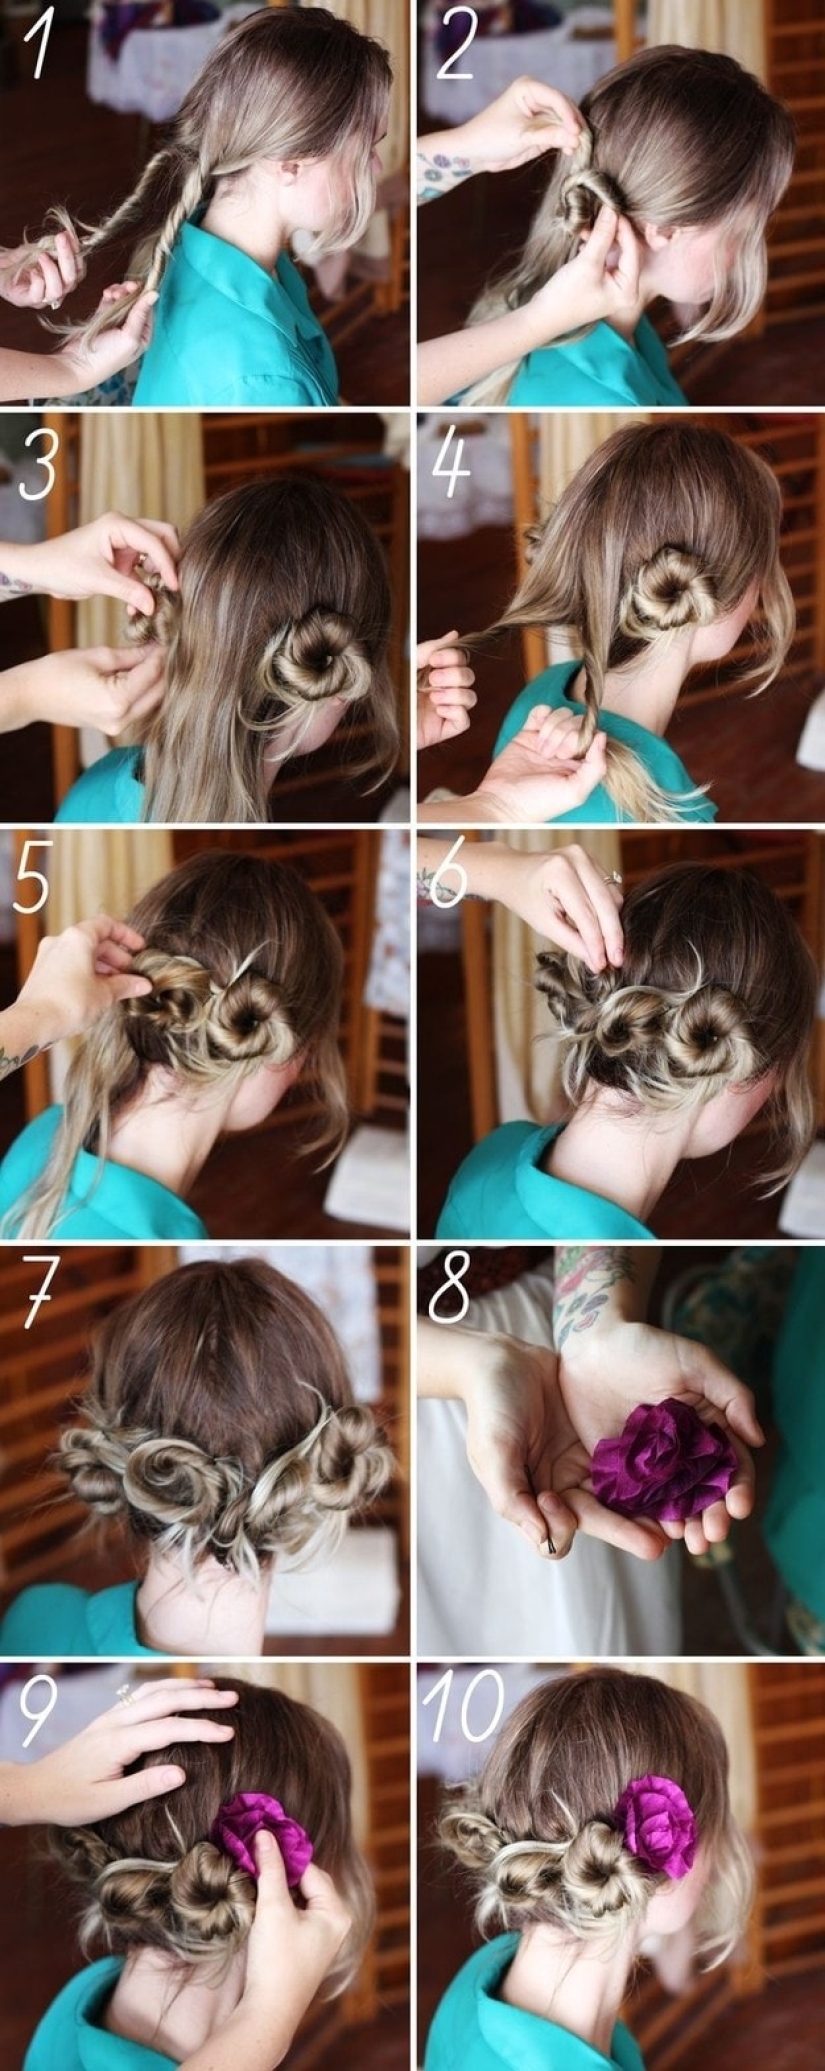 32 simple and fast hairstyles for summer in 5 minutes